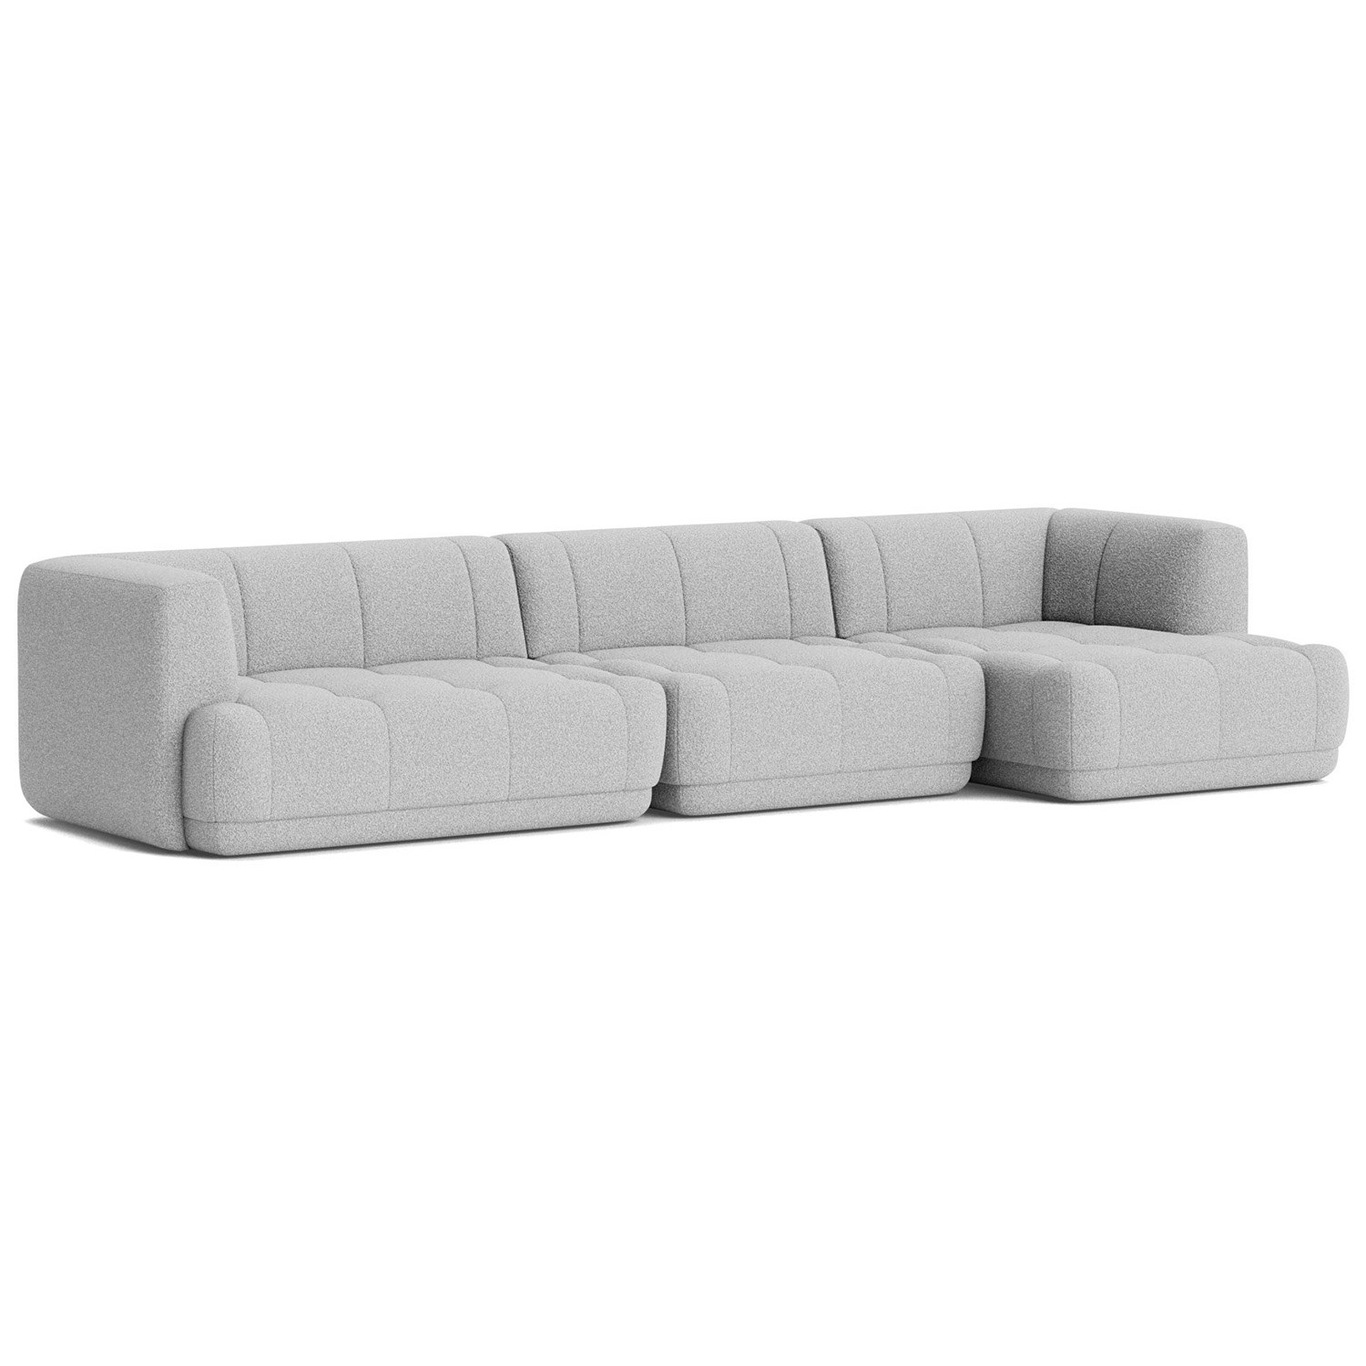 Quilton 4-Seater Sofa Configuration 17 Right, Flamiber C8 Grey